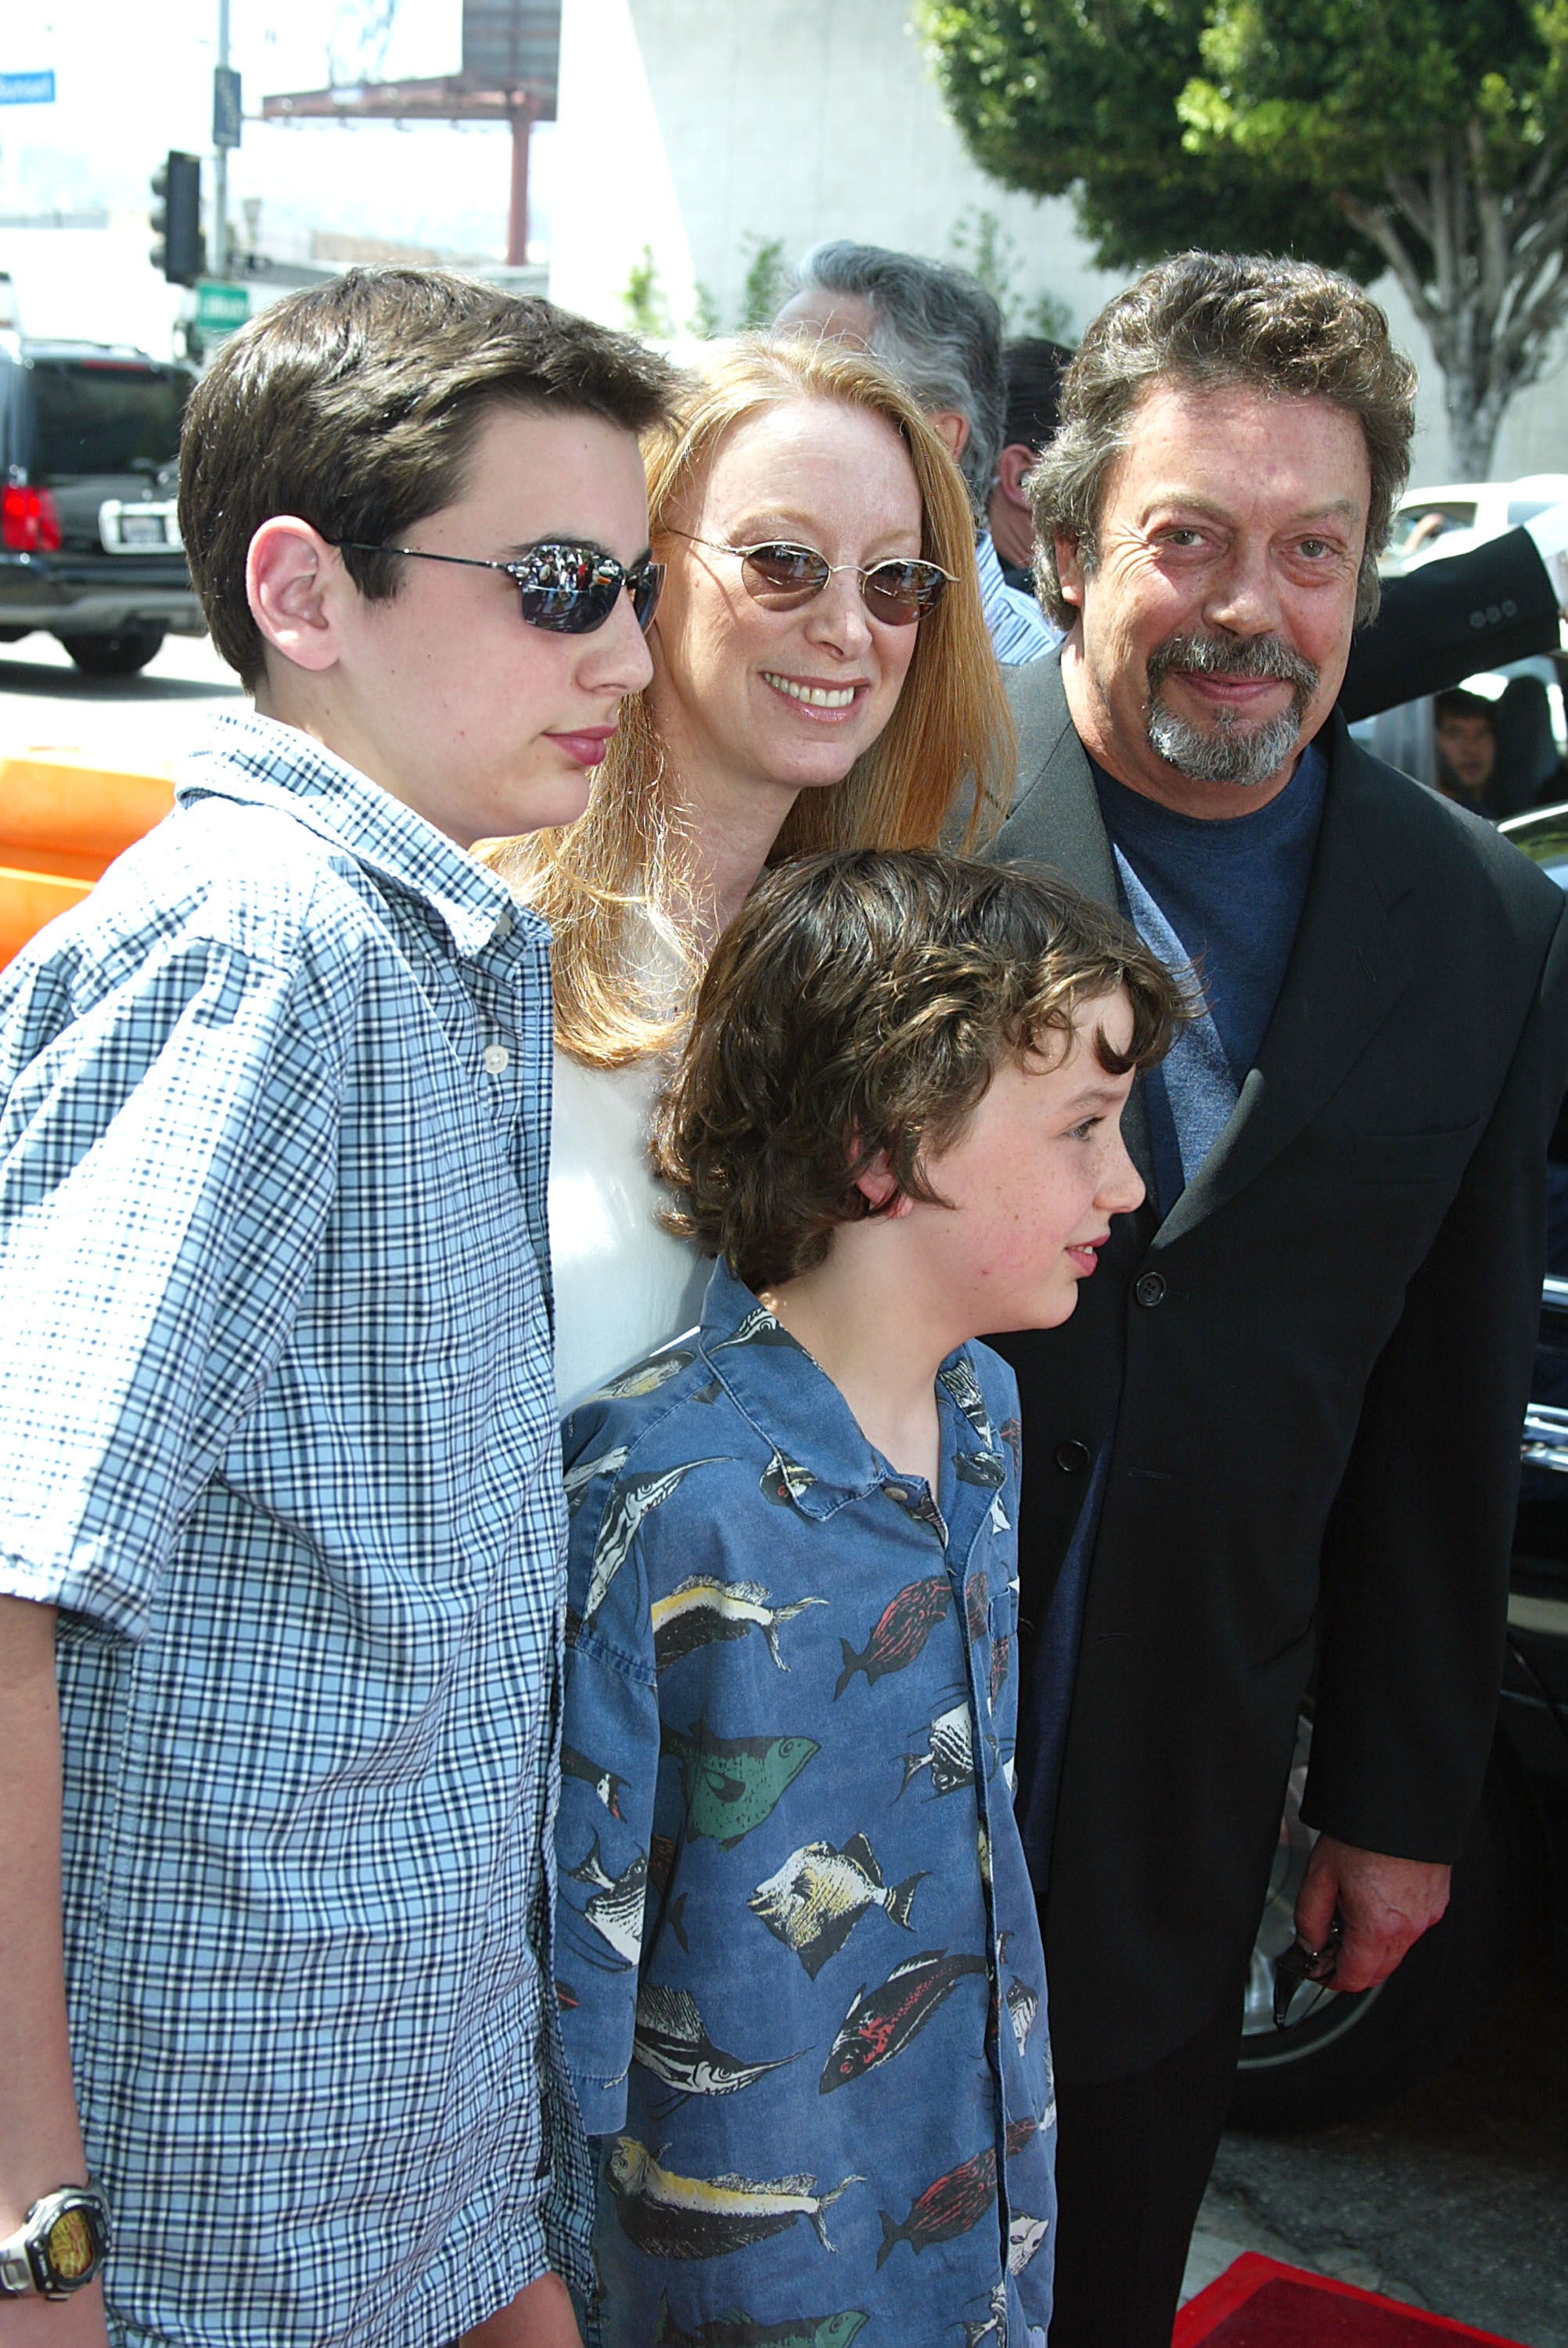 Actor Tim Curry (R) and his family arrive at the premiere and after-party for "Rugrats Go Wild" at the Cinerama Dome on June 1, 2003 in Los Angeles, California | Source: Getty Images